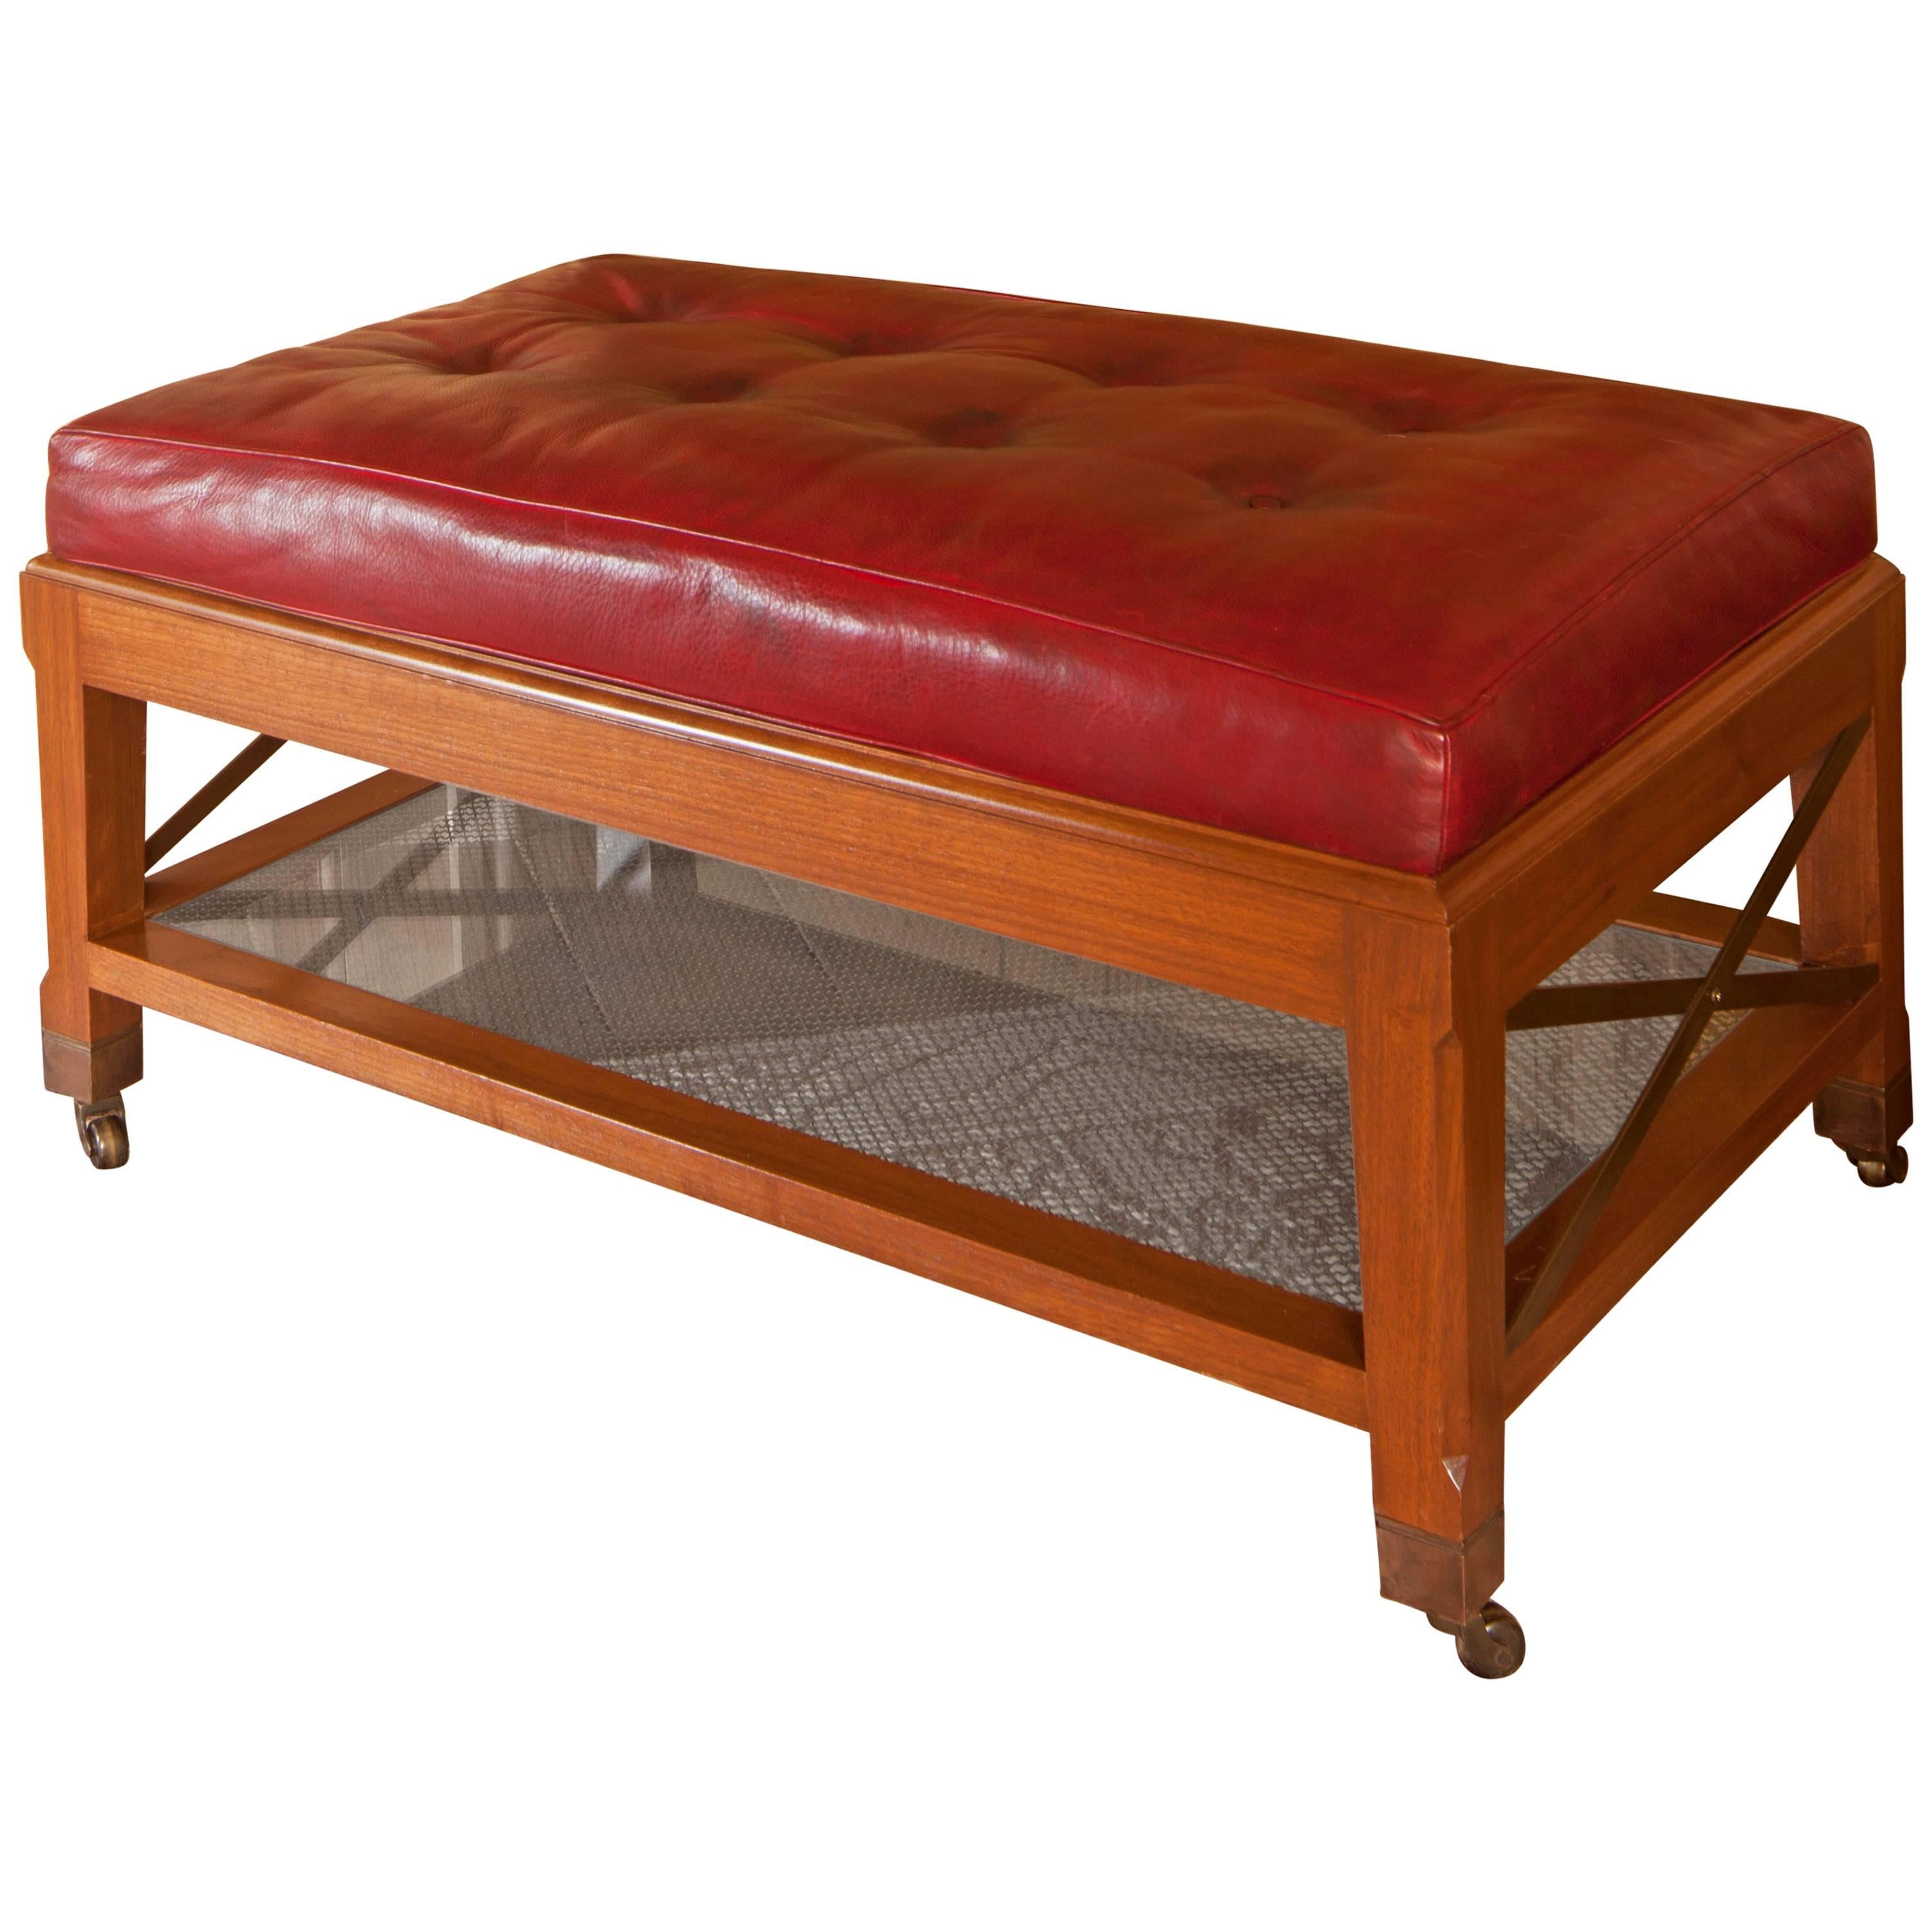 David Easton Walnut and Red Leather Ottoman Coffee Table